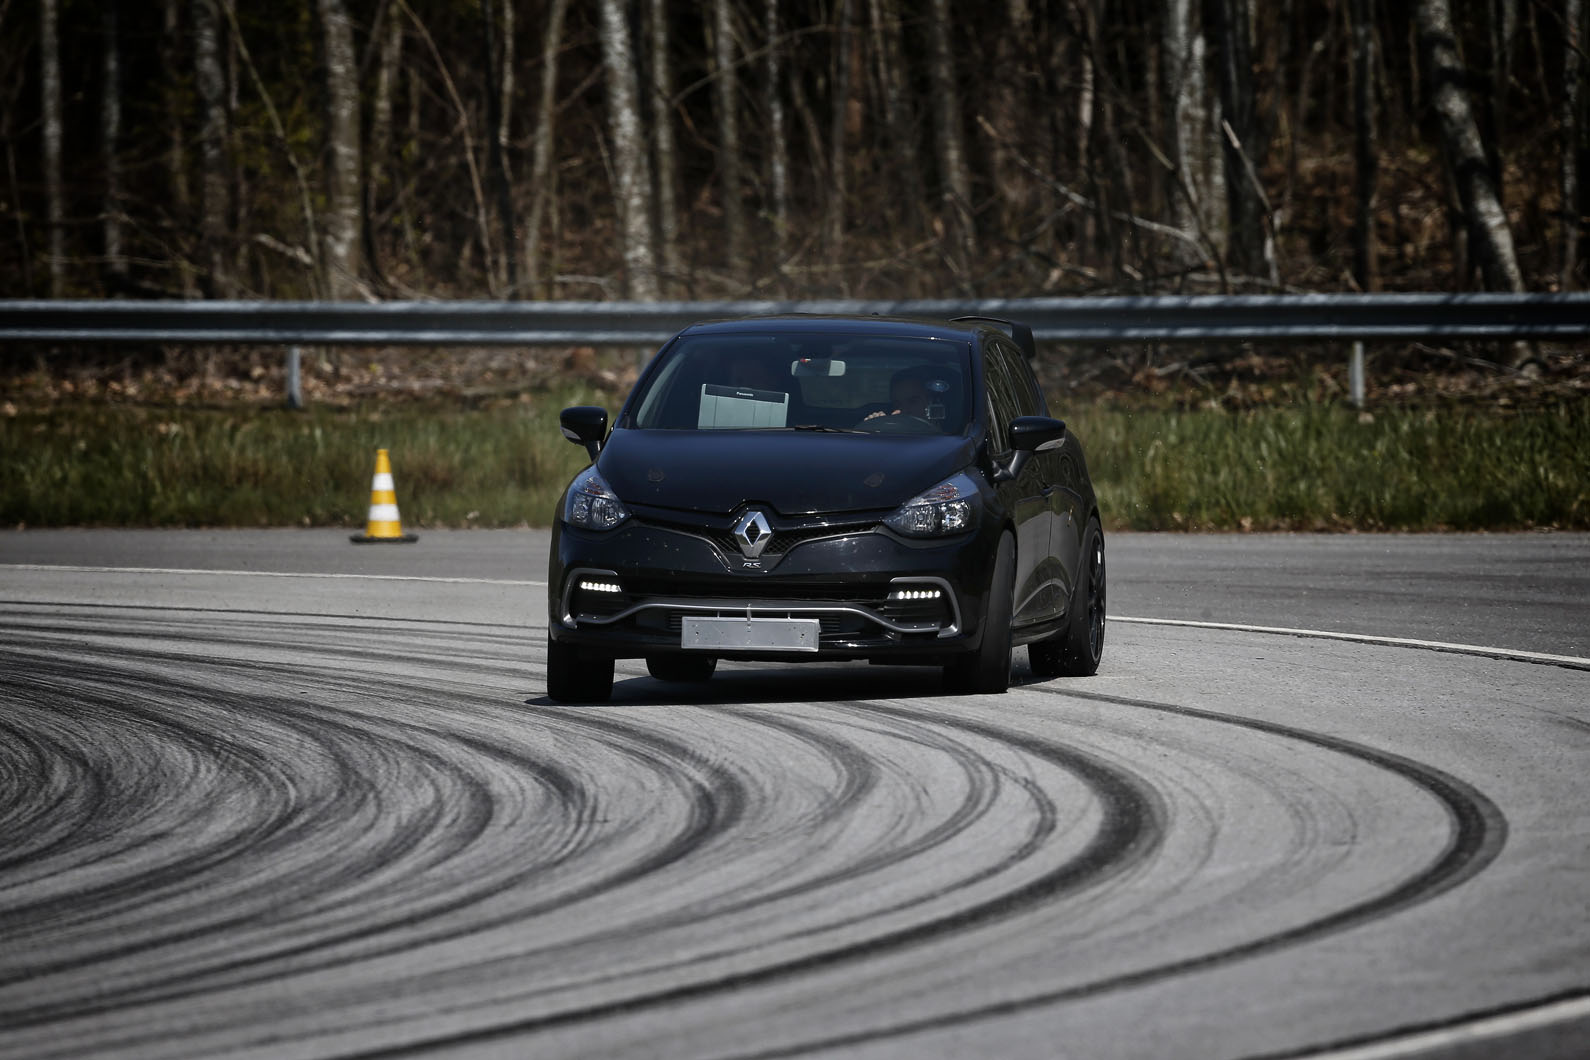 Renault returns to Formula 1 with Renault Clio R.S. 16 concept - CarWale